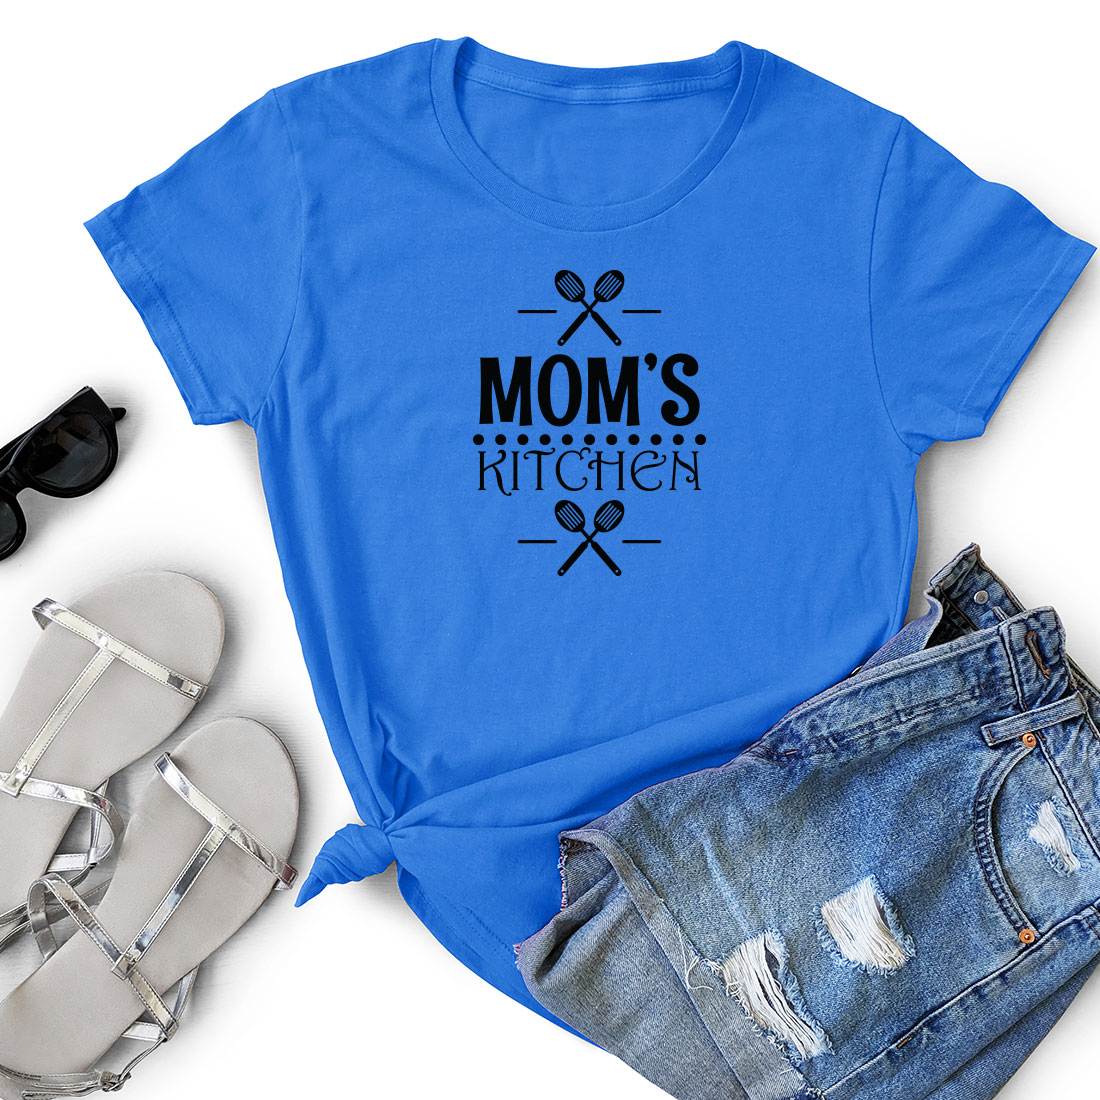 T - shirt that says mom's kitchen next to a pair of shorts.